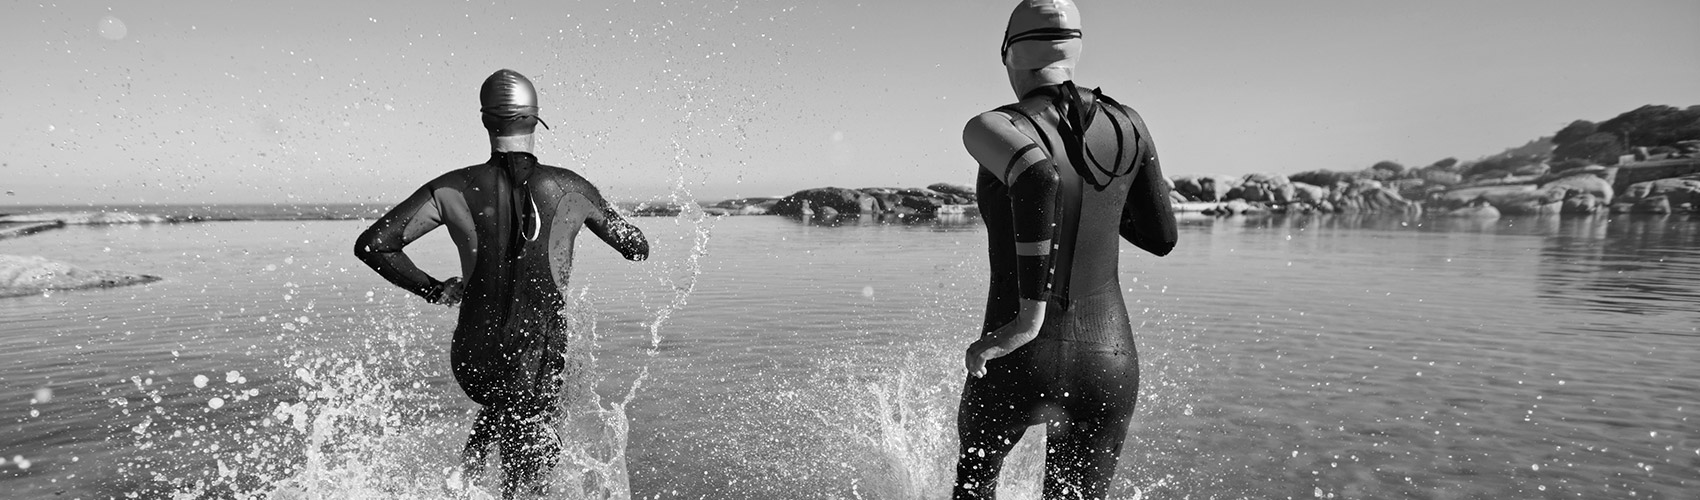 5 Things You Shouldn’t Say To A Triathlete